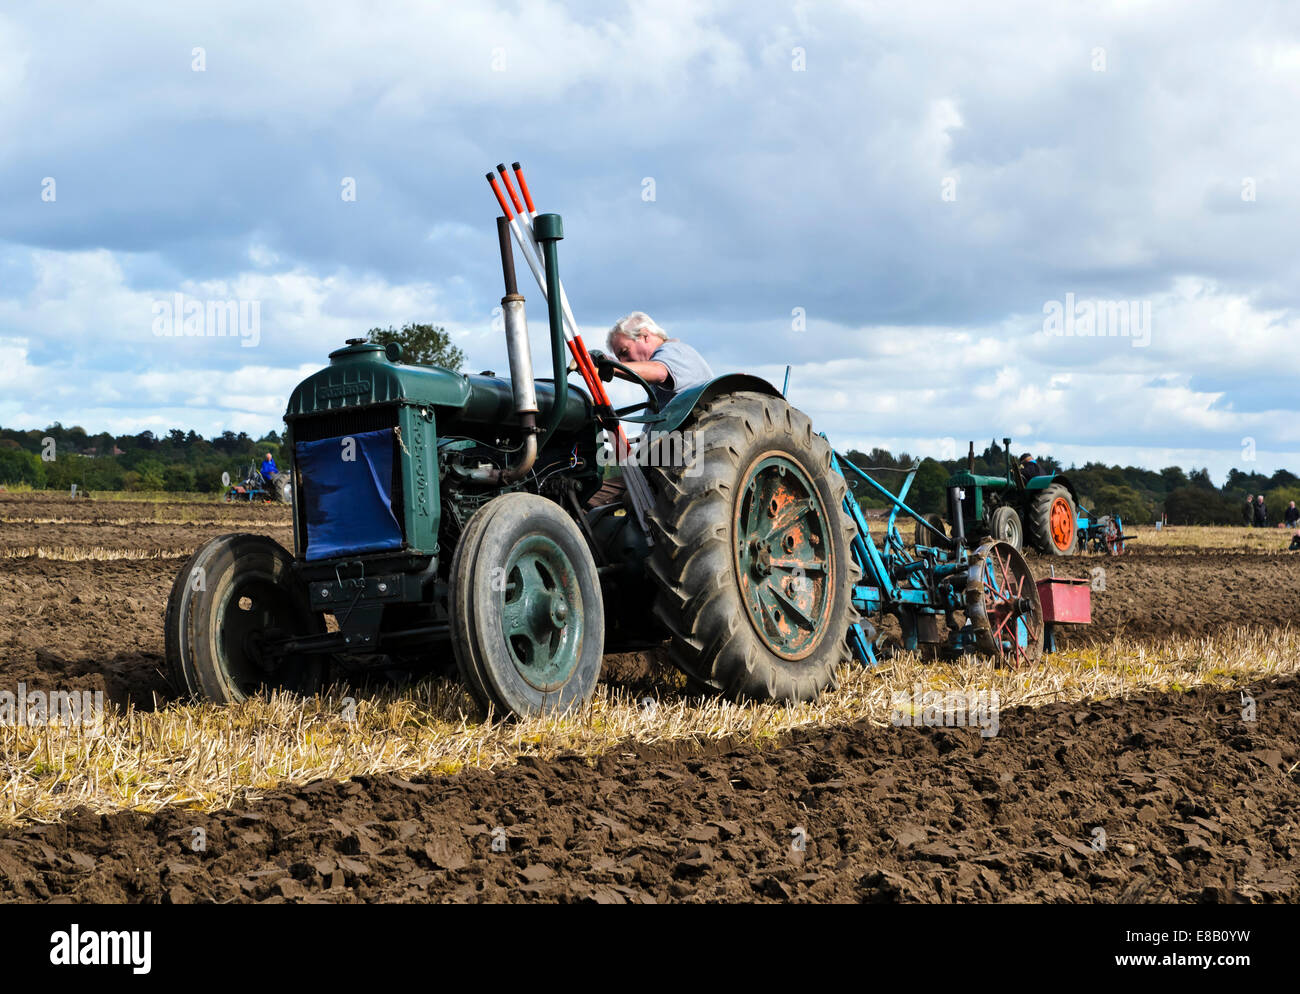 vintage fordson tractor at cheshire ploughing match / competition Stock Photo